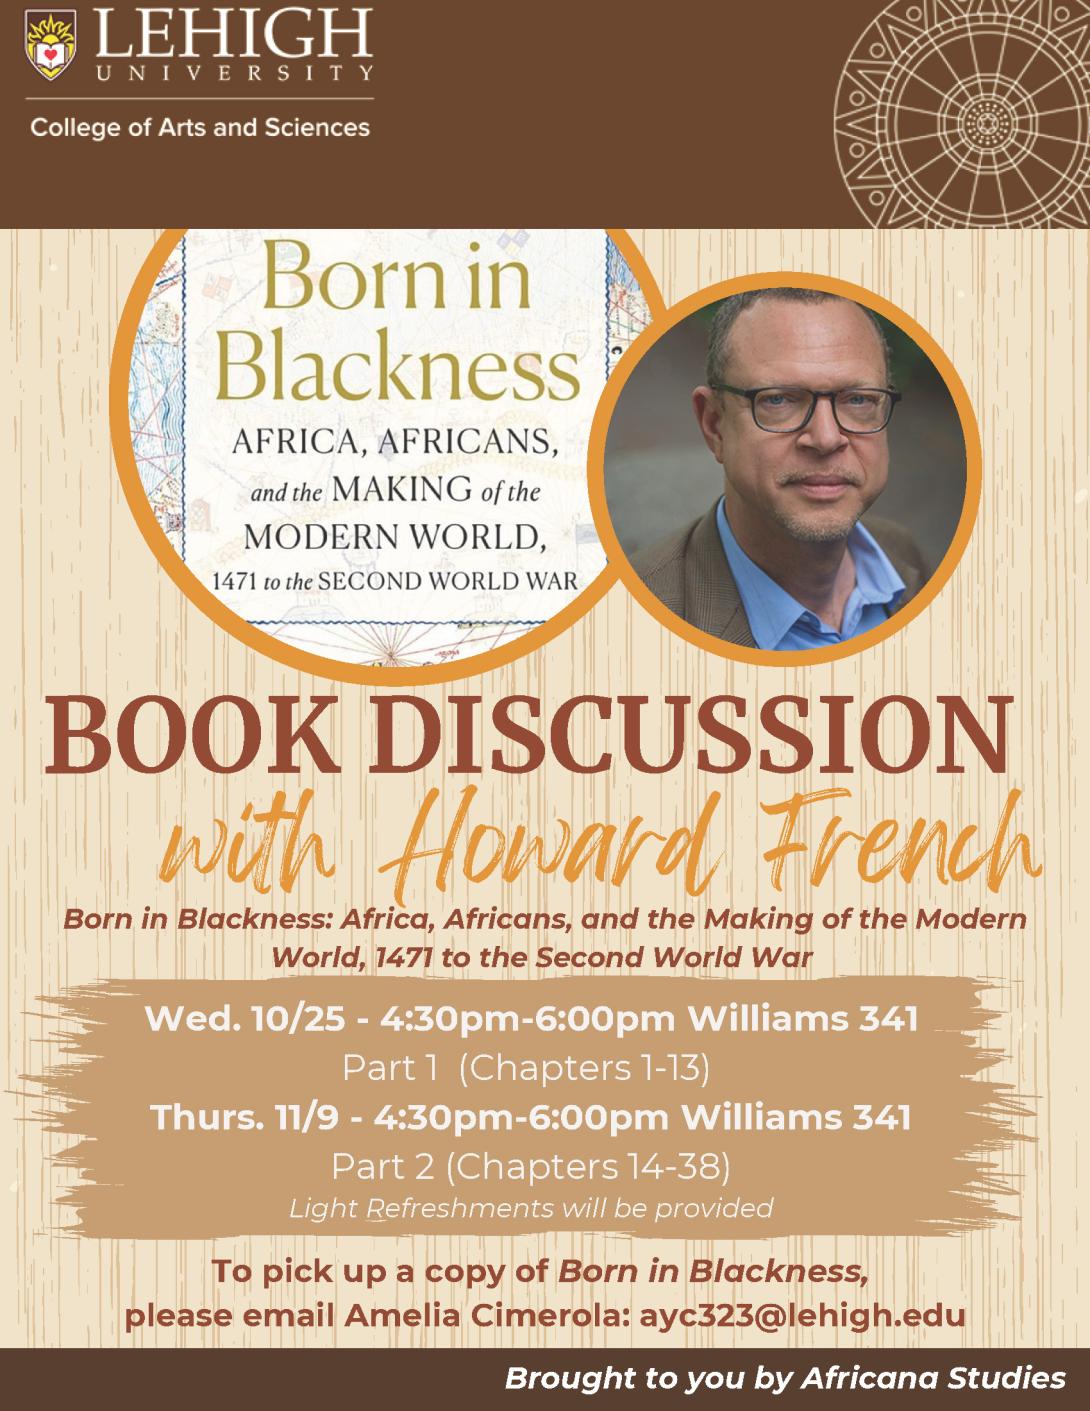 Howard French book discussion